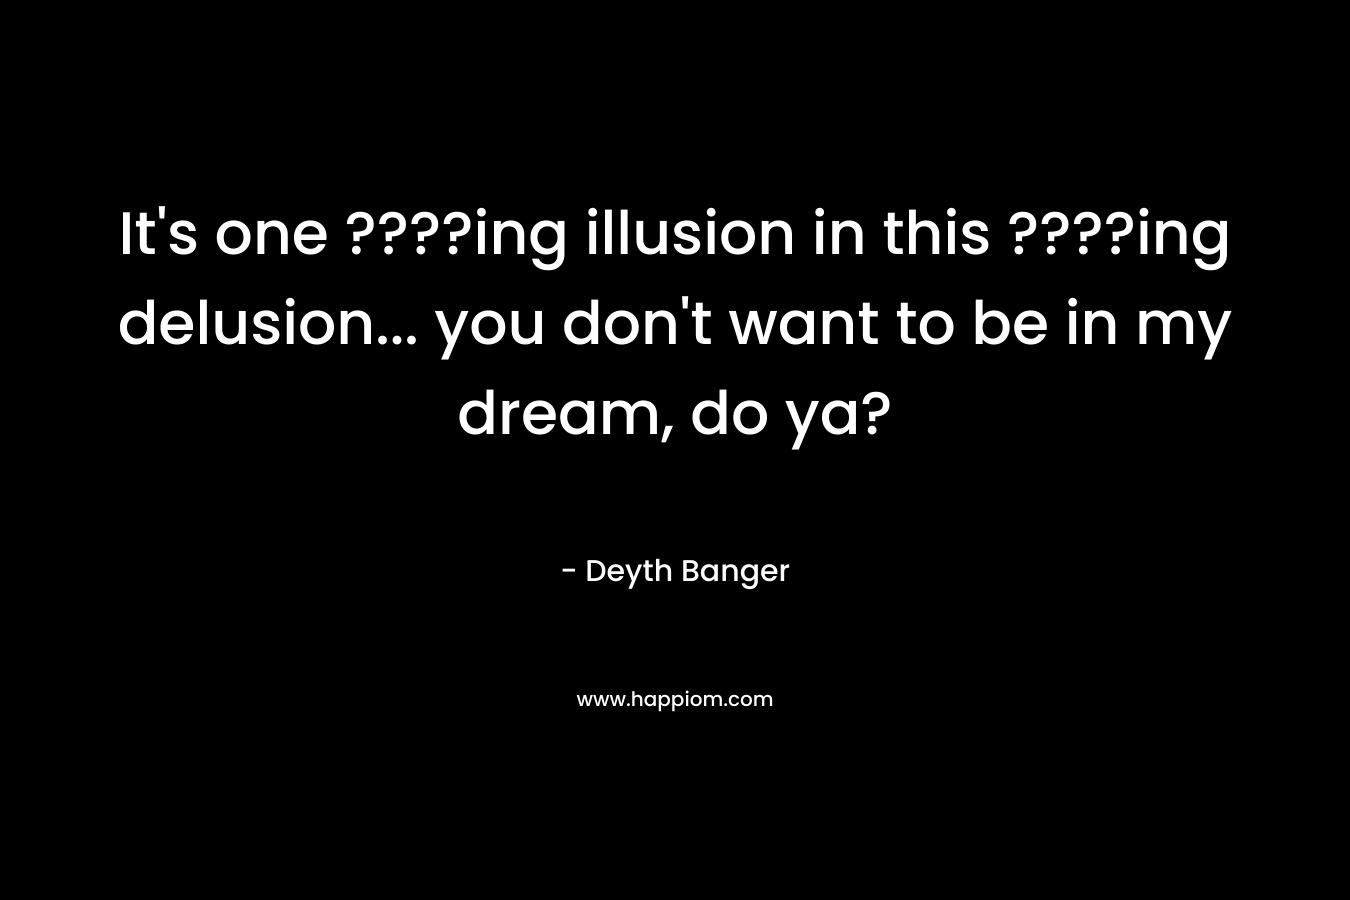 It's one ????ing illusion in this ????ing delusion... you don't want to be in my dream, do ya?